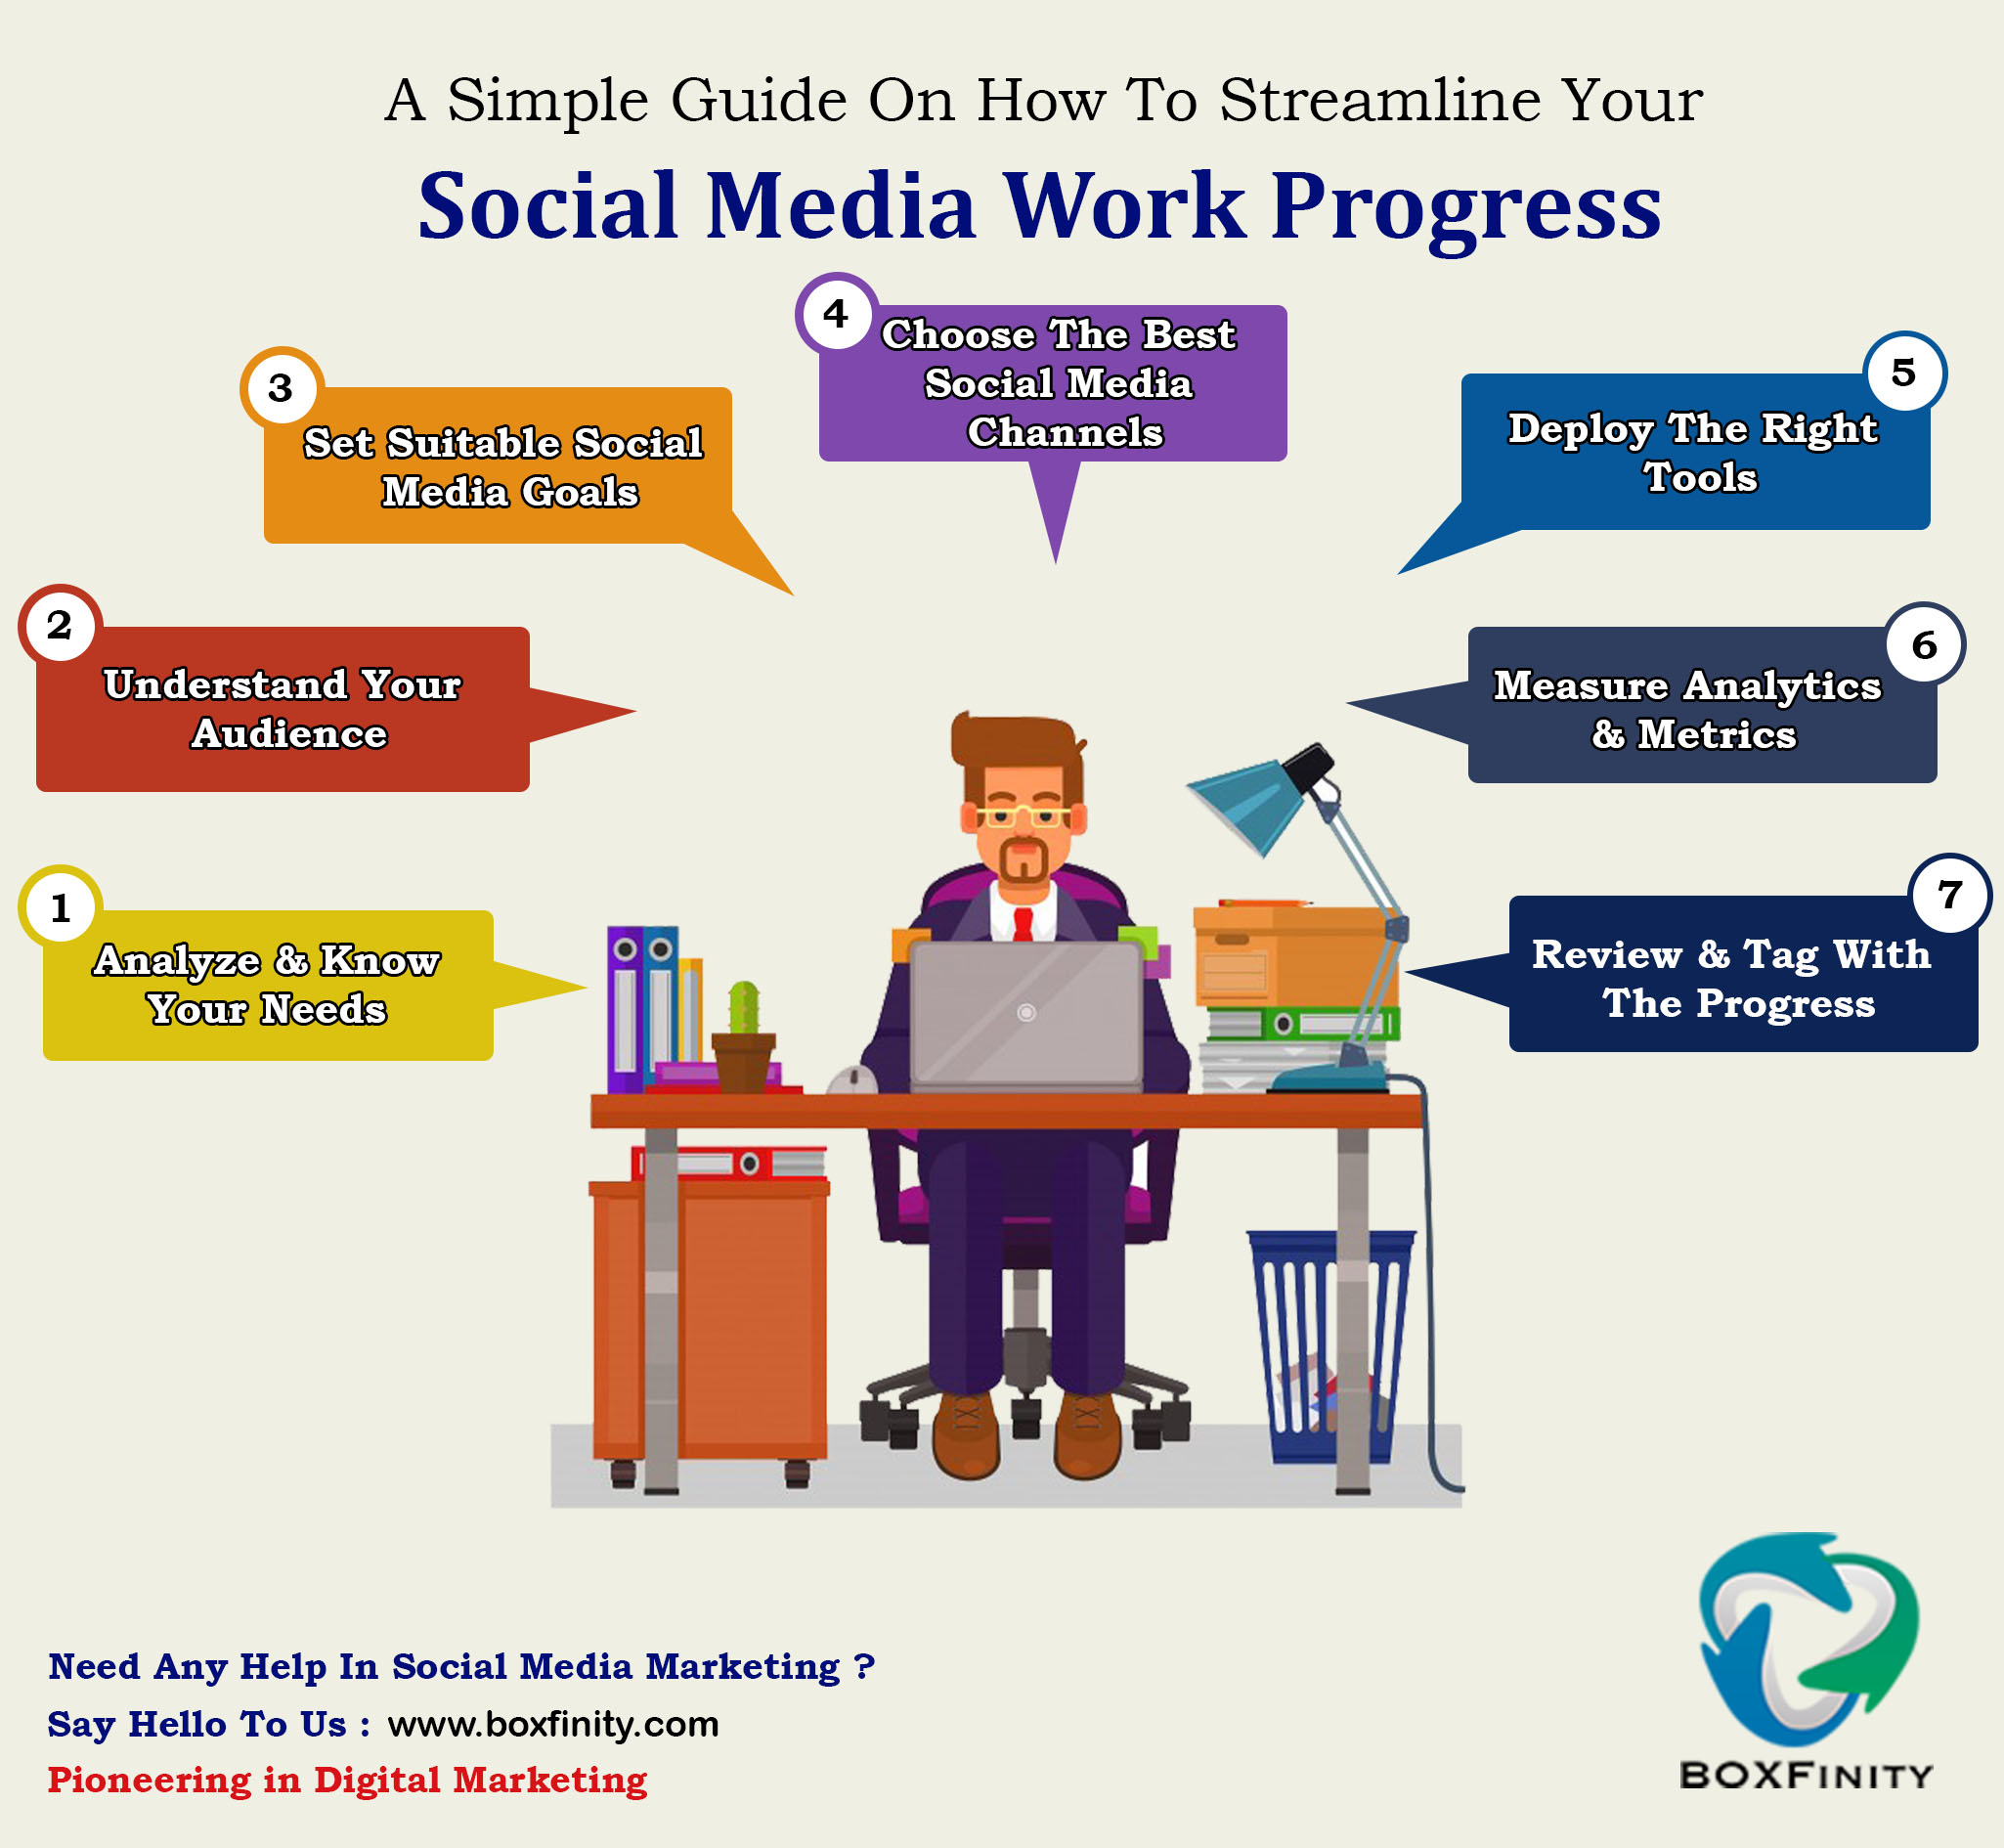 A-Simple-Guide-On-How-To-Streamline-Your-Social-Media-Work-Progress-infographic-plaza